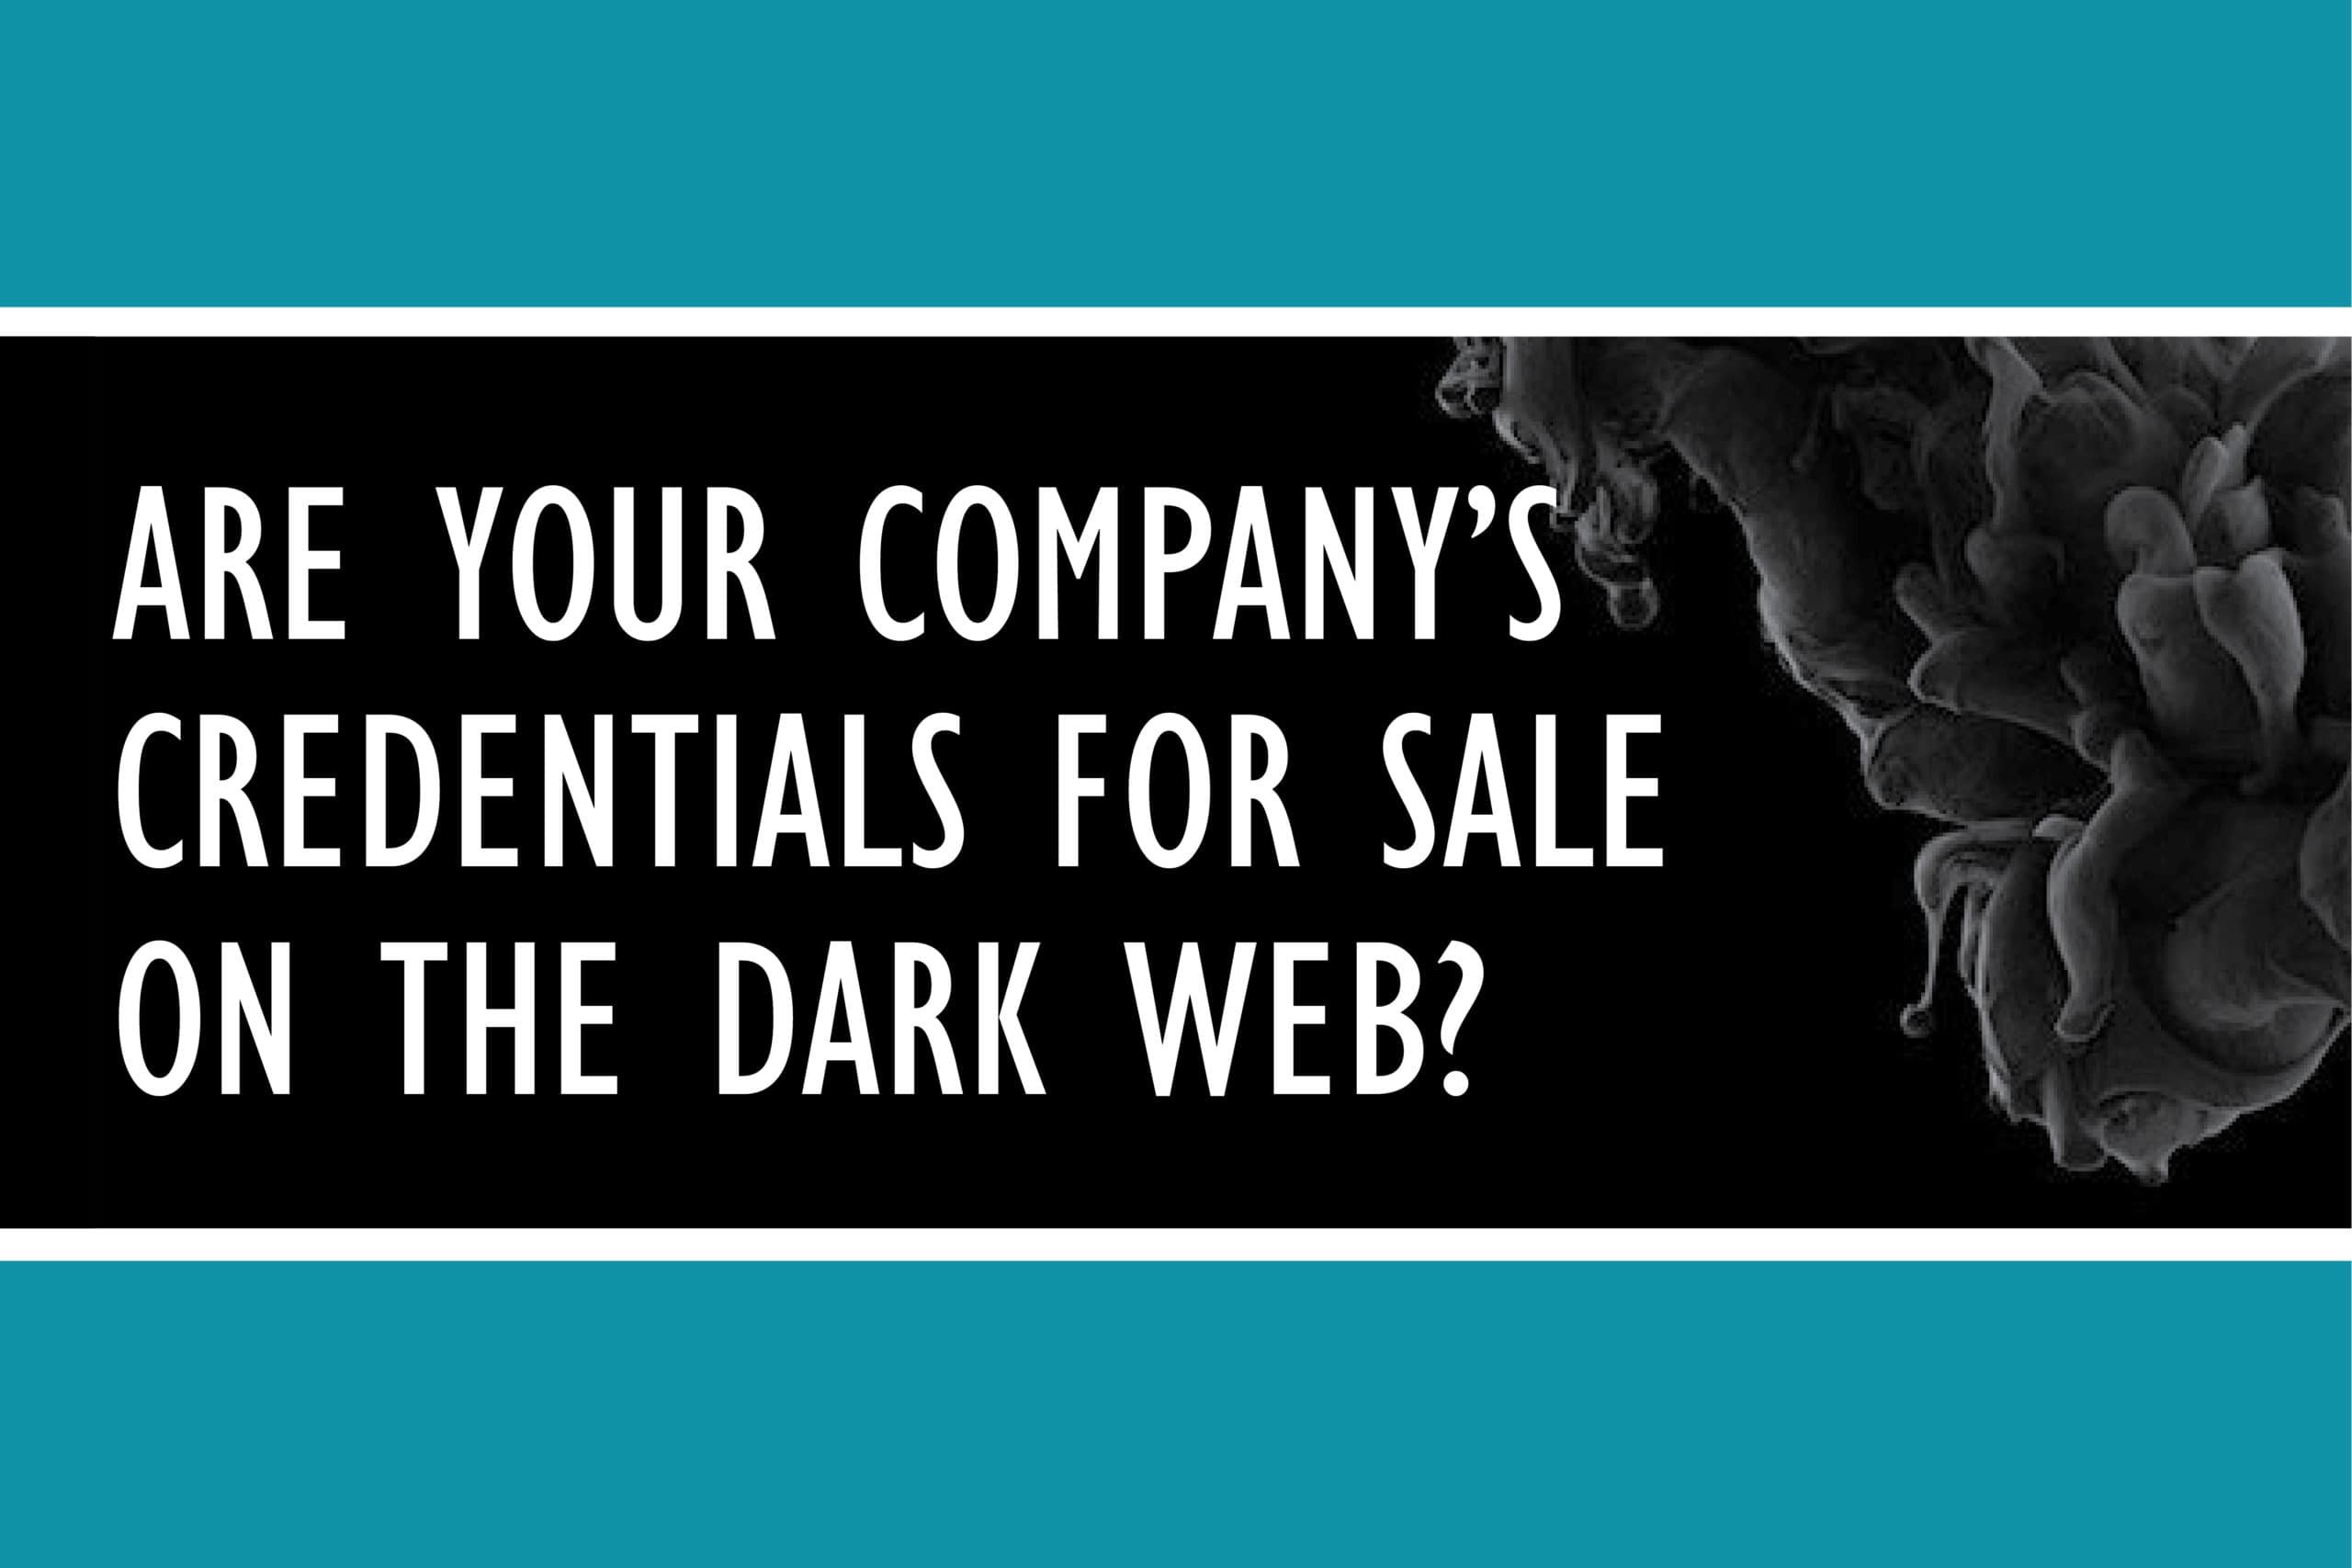 Are Your Company Credentials for Sale?